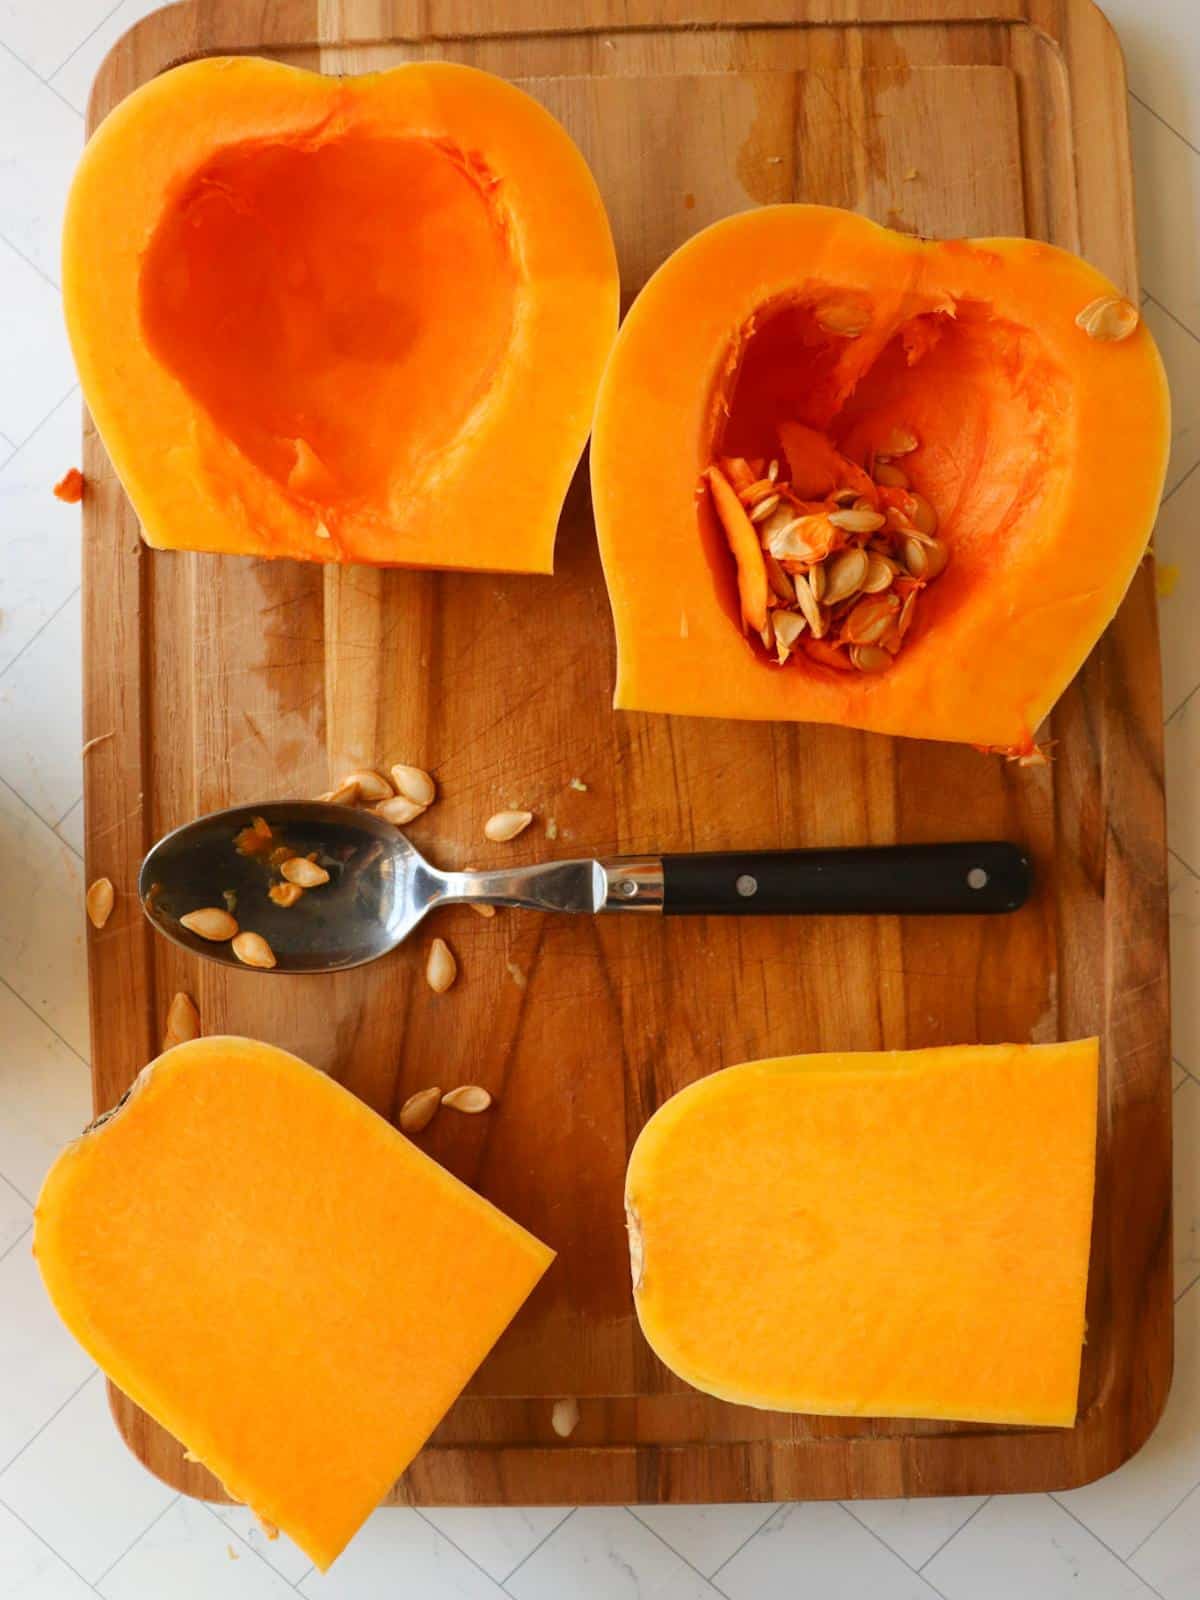 A butternut squash on a cutting board, with a spoon scooping out the inner seeds.